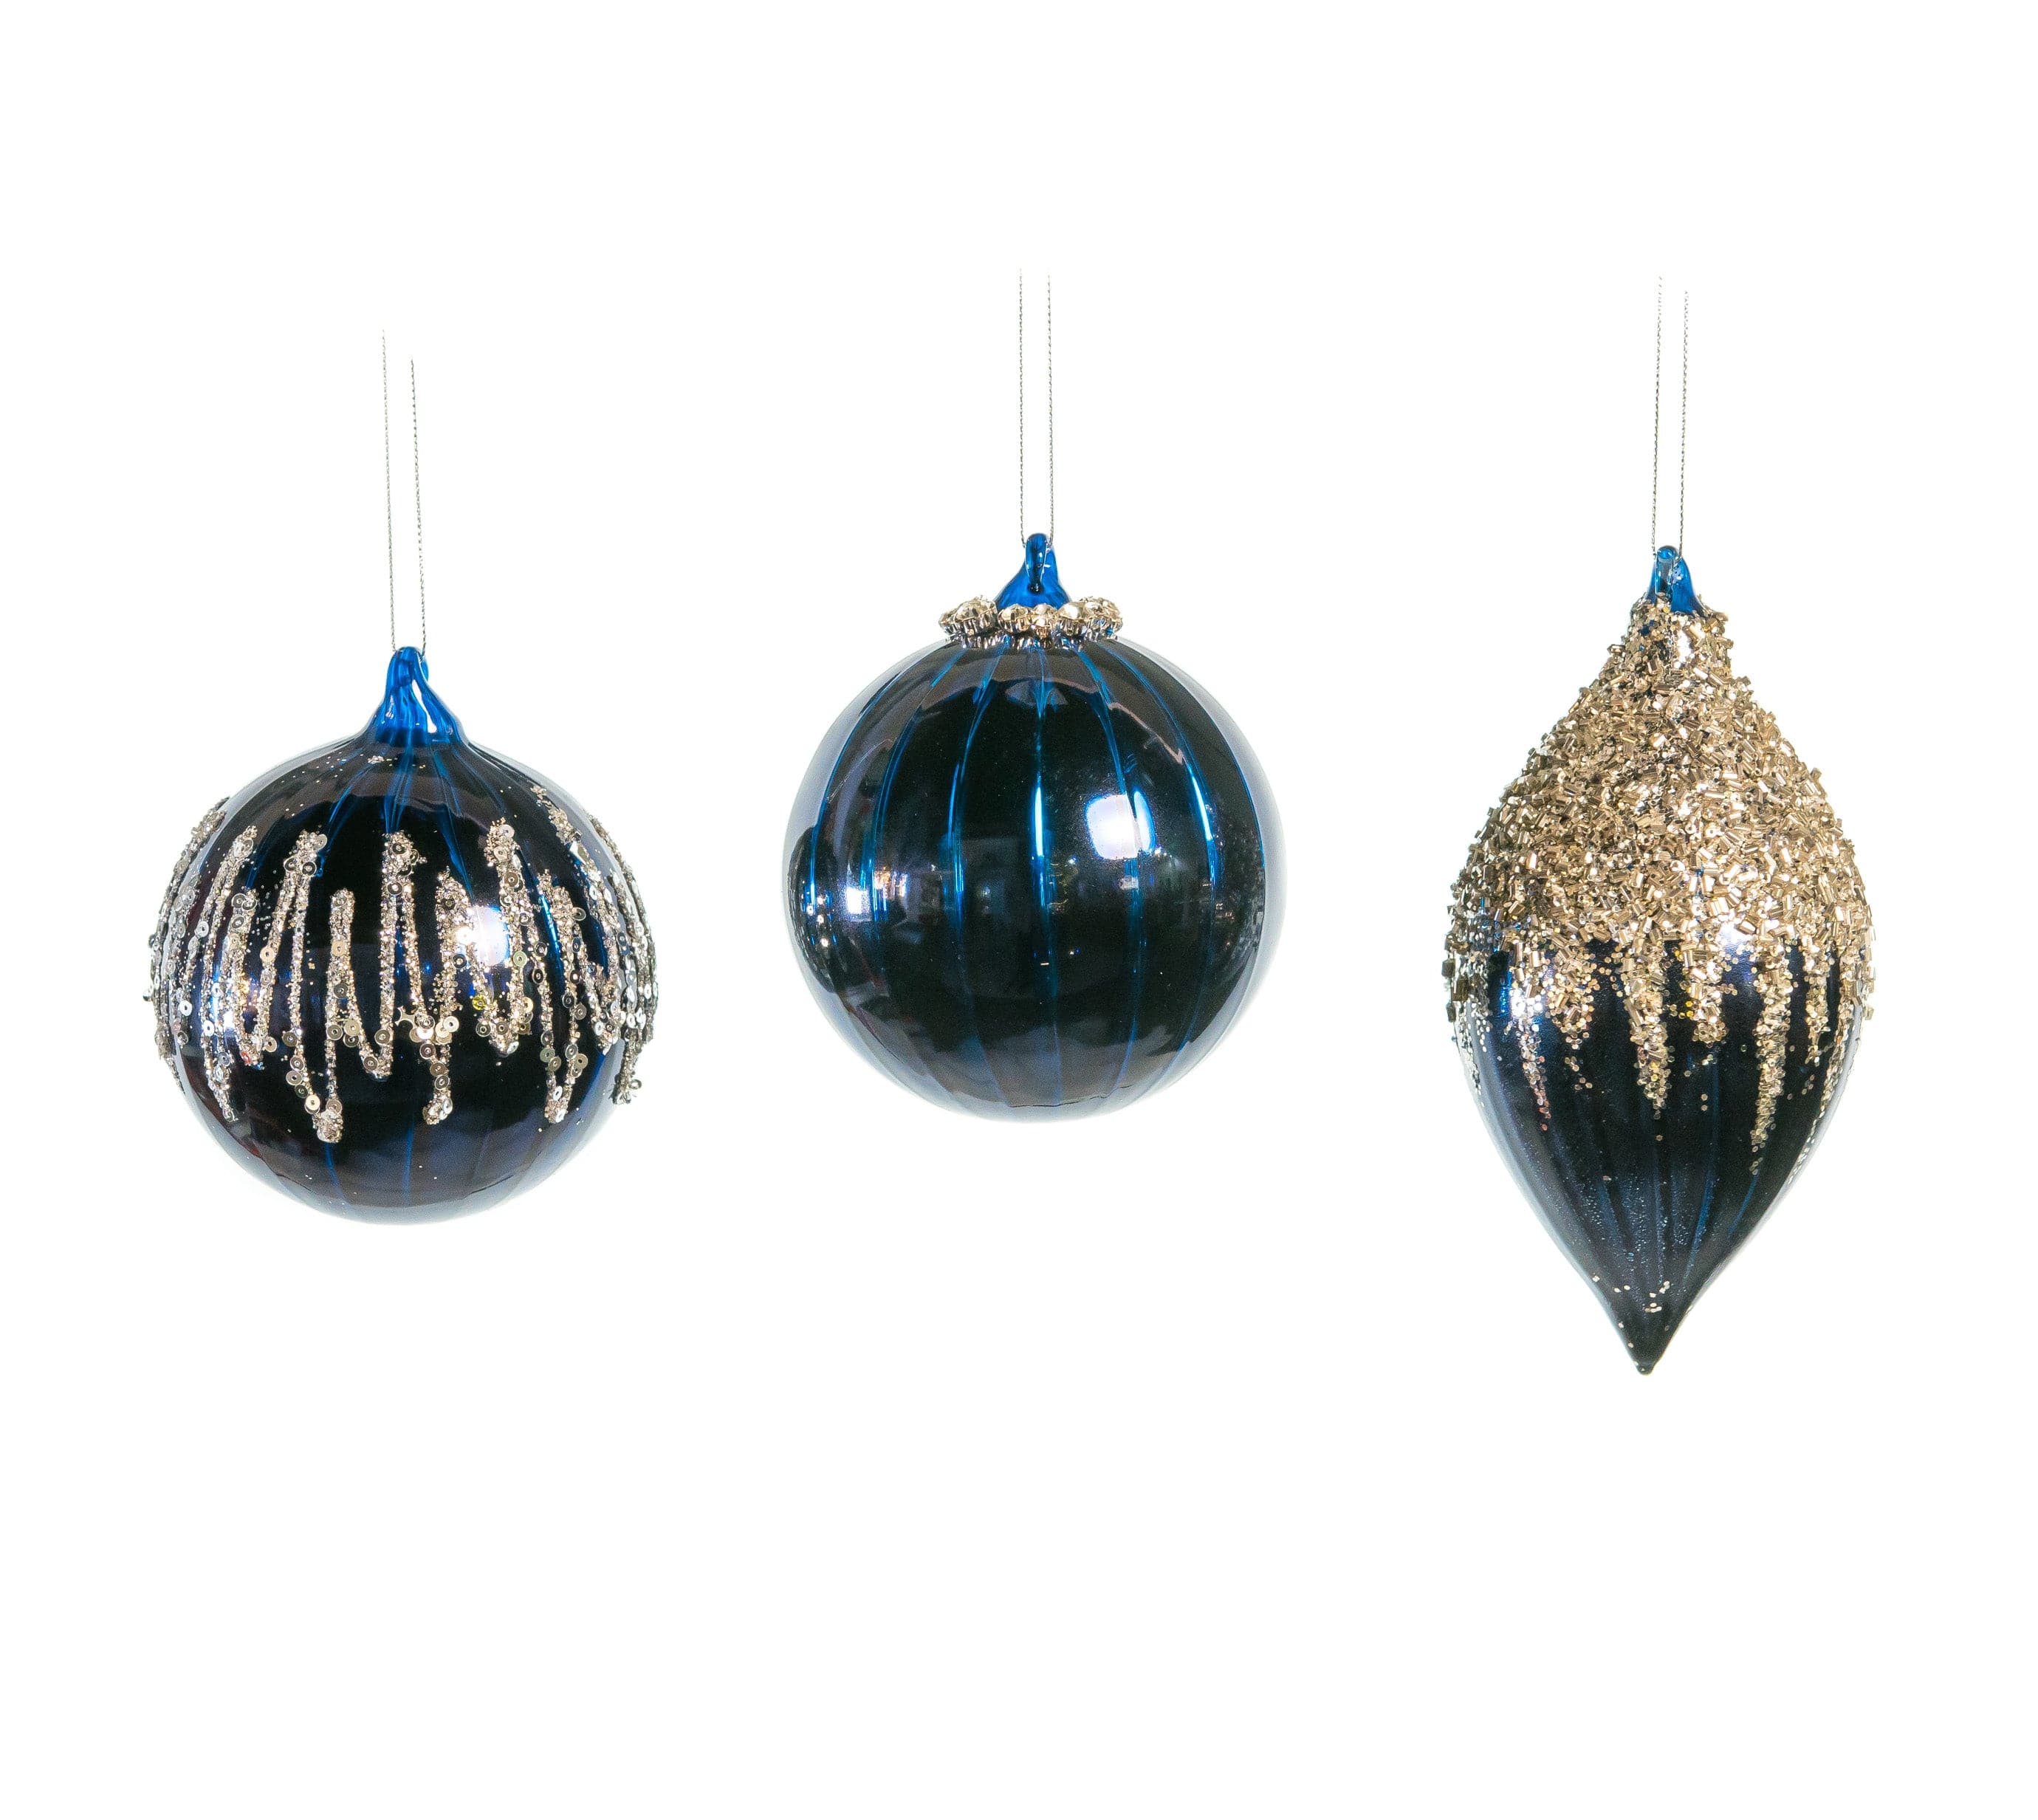 Image of 4" NIGHT BLUE SHINY GLASS DECORATIVE ORNAMENTS ASSORTED SET OF 12